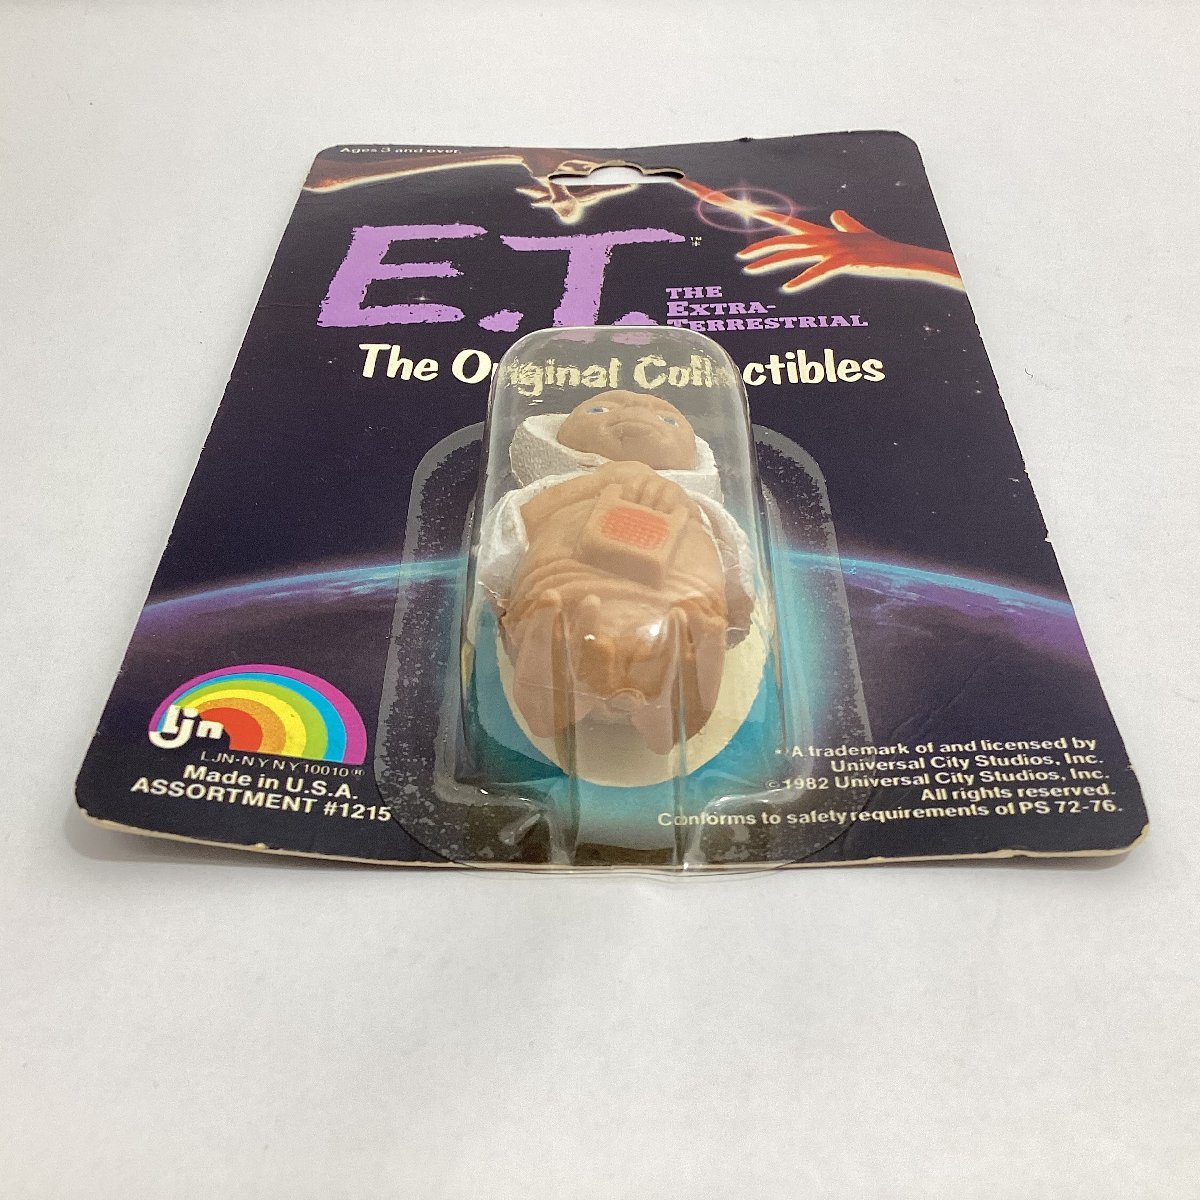  unopened E.T. THE EXTRA-TERRESTRIAL The Original Collectibles figure 2 kind LJNi- tea Made in U.S.A. height approximately 5cm